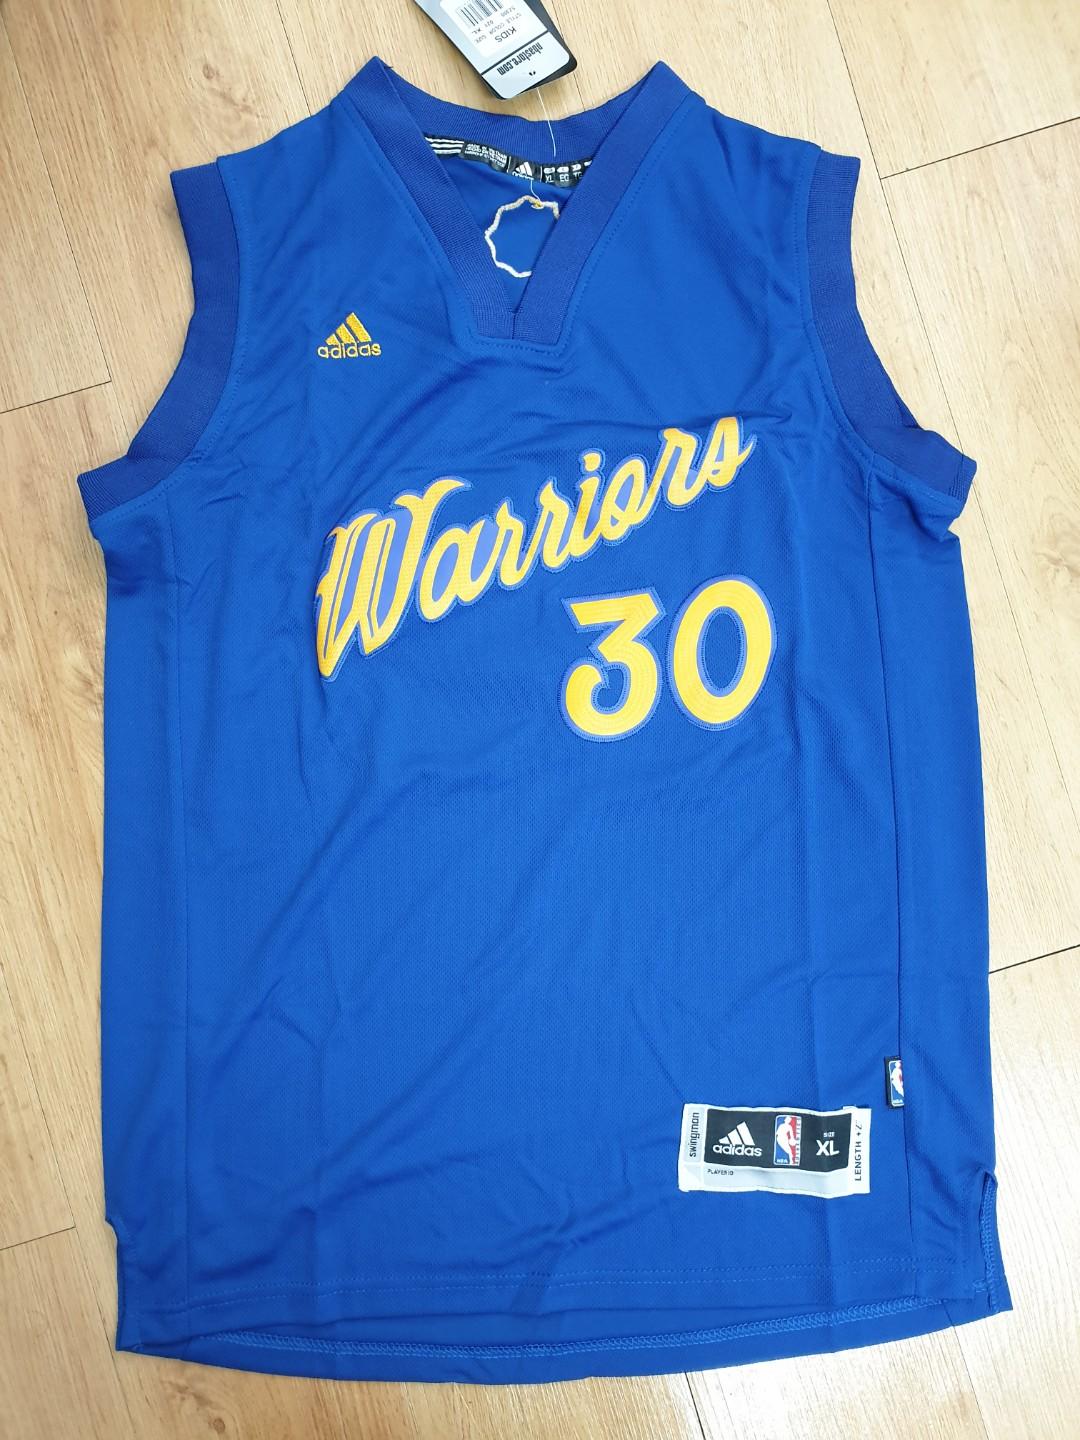 stephen curry christmas jersey